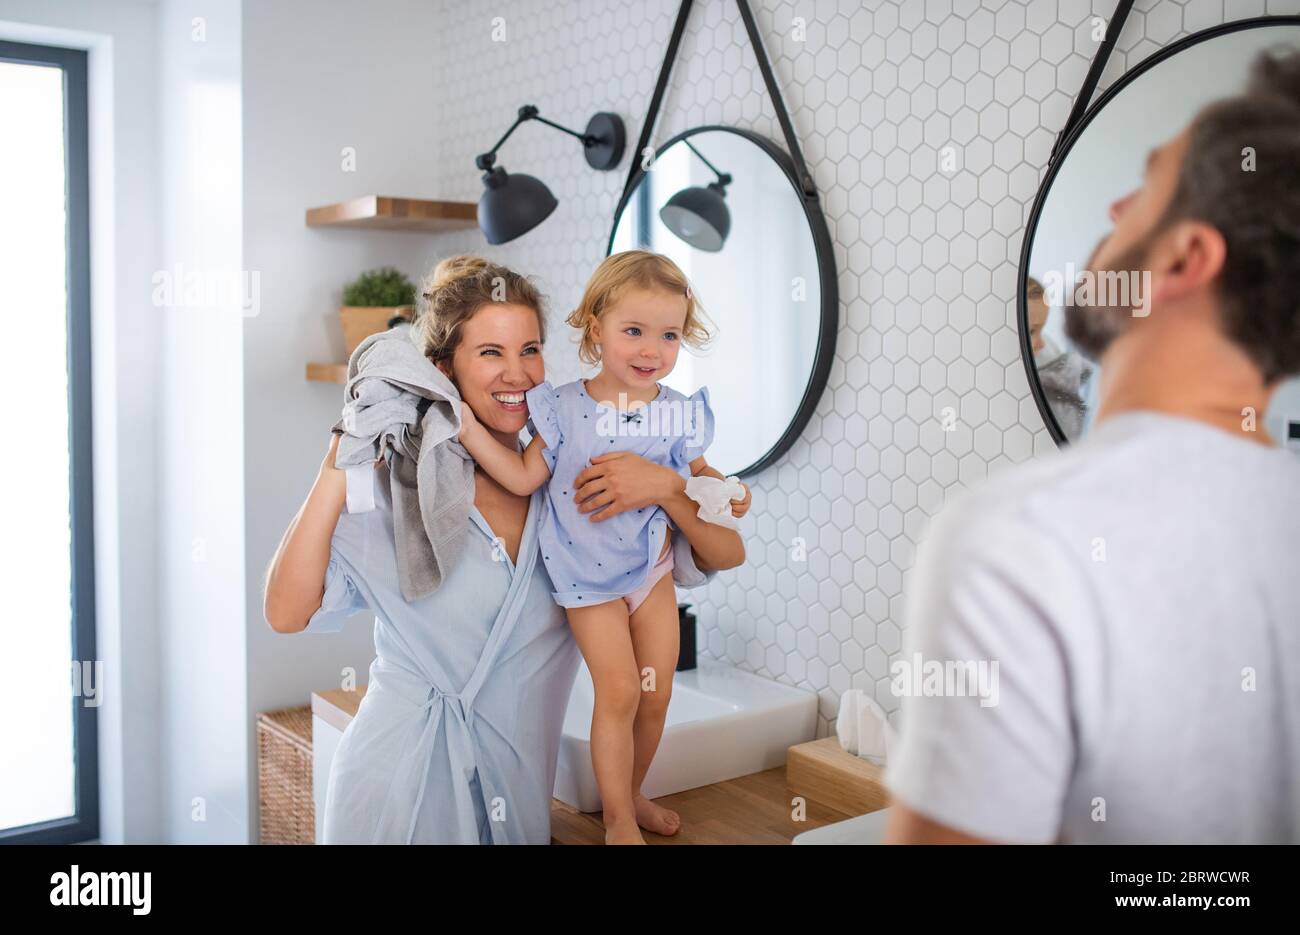 Young family with small daughter indoors in bathroom, talking. Stock Photo